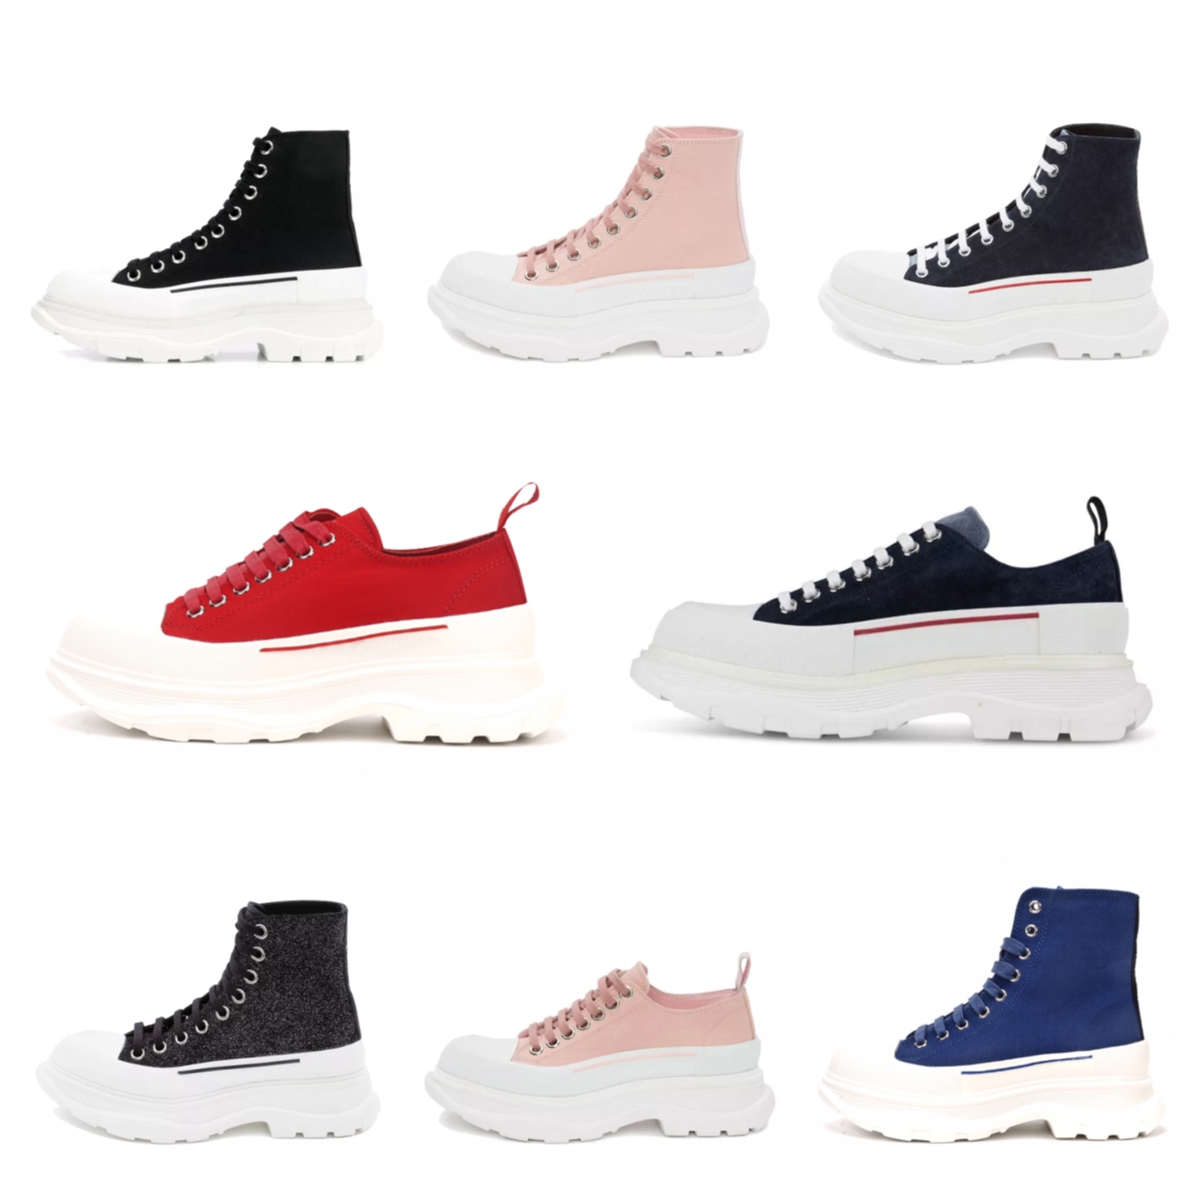 

Fashion Tread Slick lace up luxurys oversized shoes canvas sneaker women high low sole black royal platform red pink white womens sneakers, Box